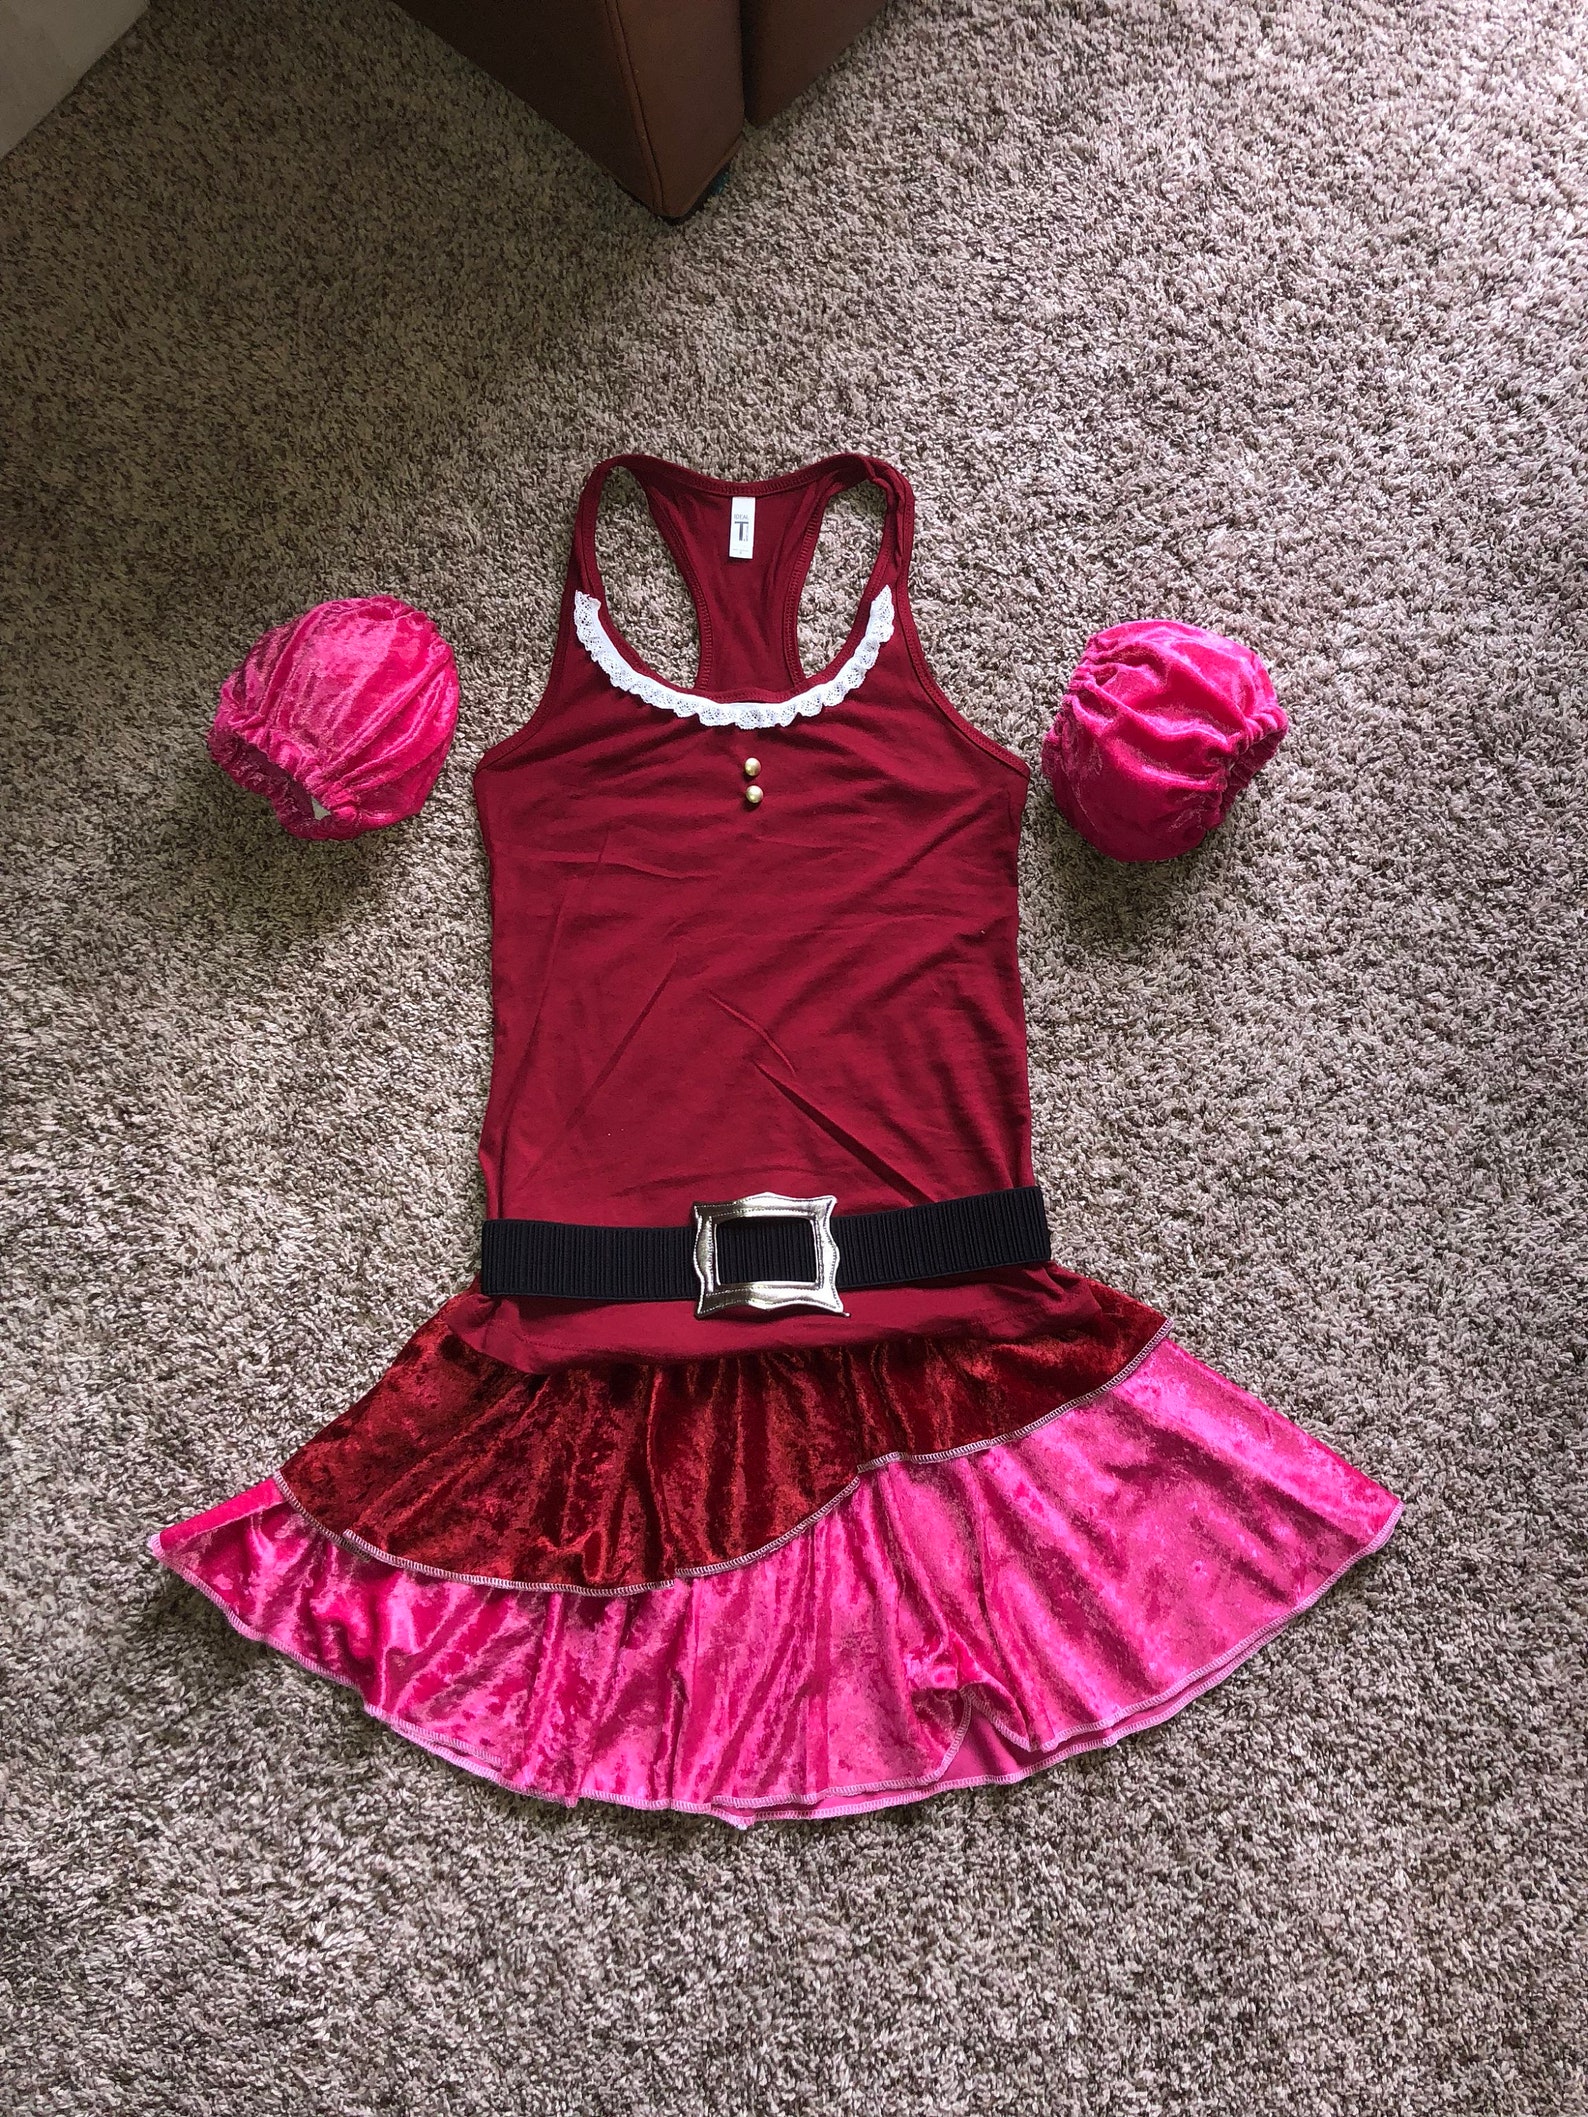 Red Redheaded Pirate of the Caribbean Inspired Running Costume - Etsy